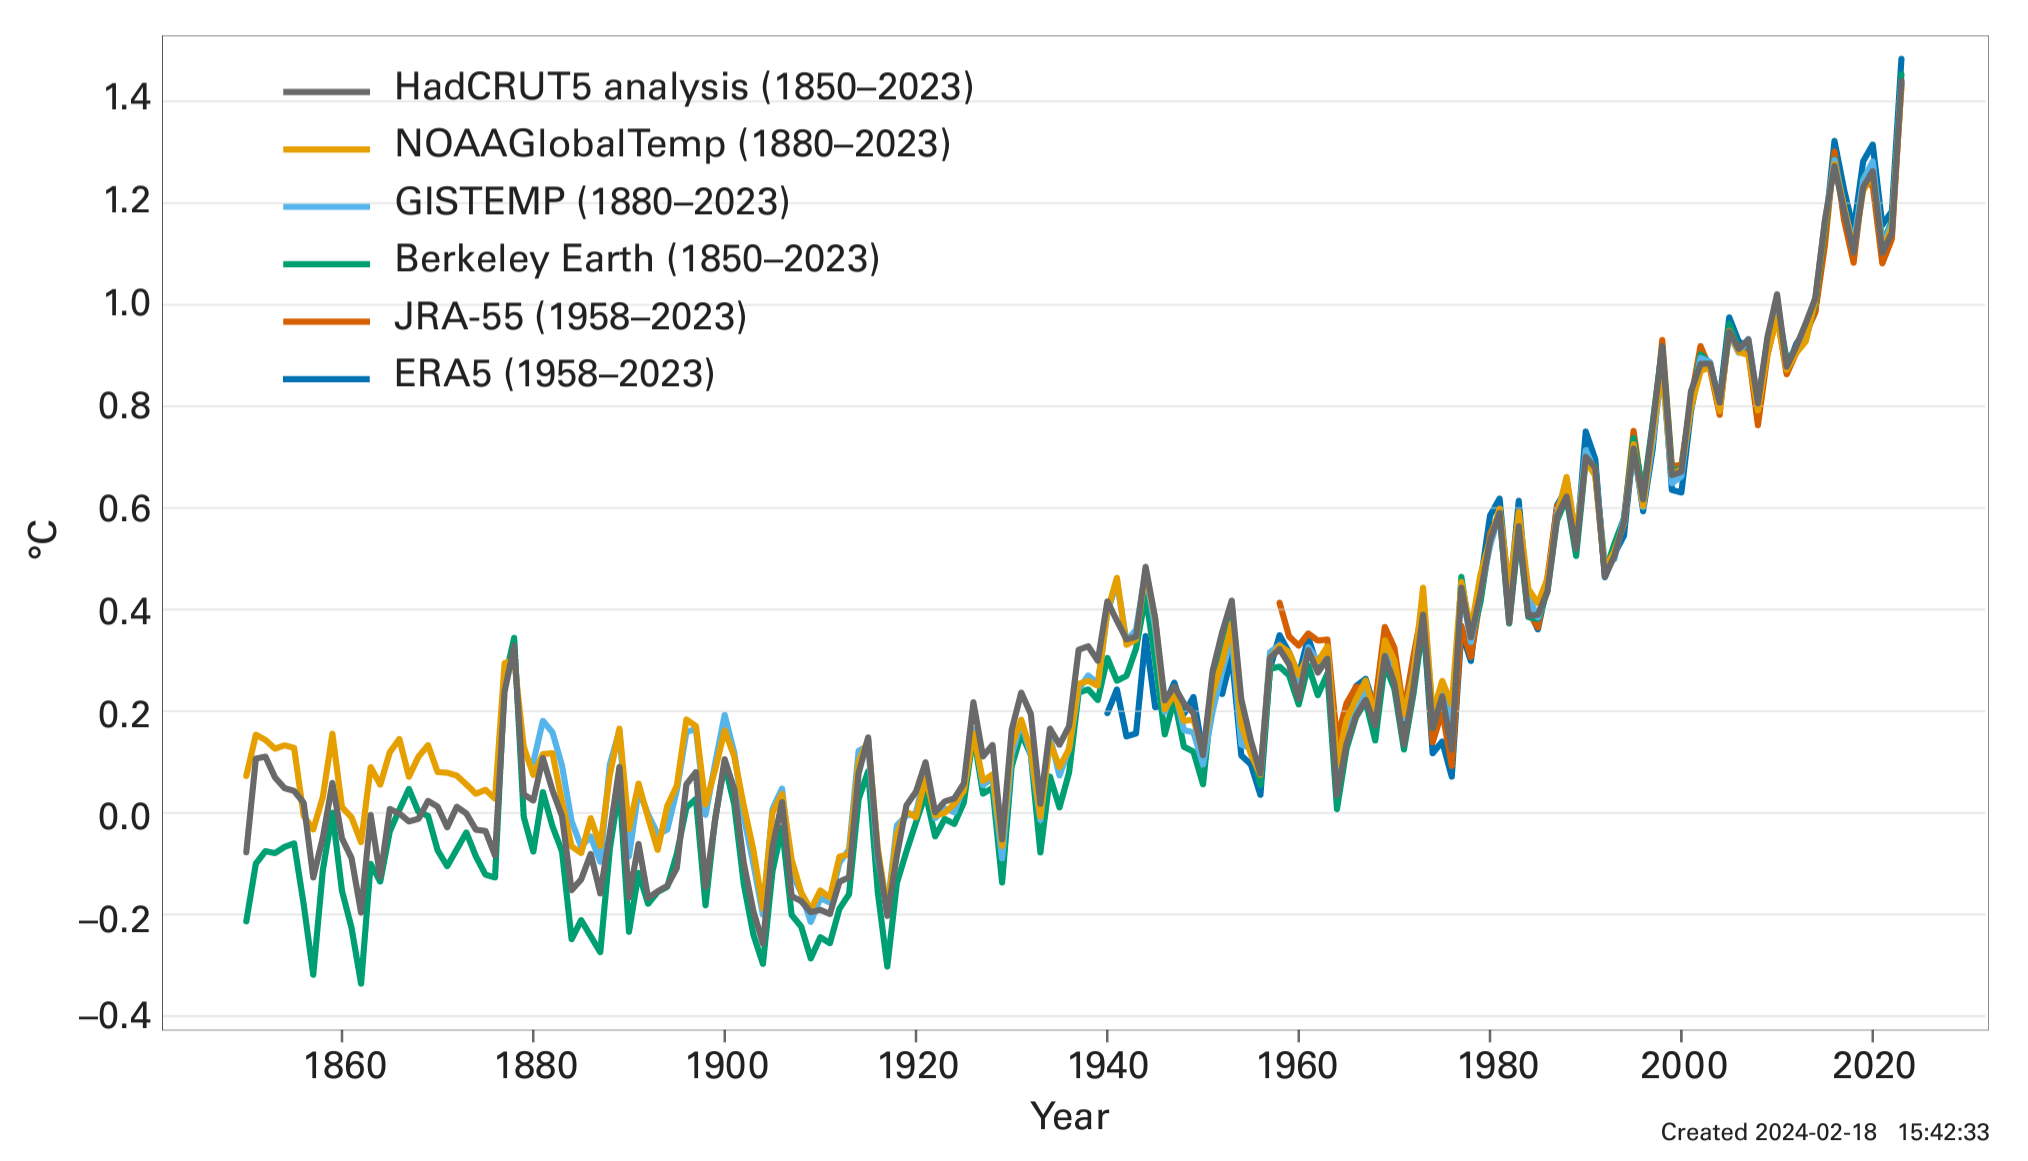 Annual global mean surface temperature anomalies relative to 1850–1900. Global mean near-surface temperature in 2023 was 1.45 ± 0.12 °C above the 1850–1900 average. The analysis is based on a synthesis of six global temperature datasets. 2023 was the warmest year in the 174-year instrumental record in each of the six datasets. The past nine years – from 2015 to 2023 – were the nine warmest years on record. The two previous warmest years were 2016, with an anomaly of 1.29 ± 0.12 °C, and 2020, with an anomaly of 1.27 ± 0.13 °C. Globally, every month from June to December was record warm for the respective month. September 2023 was particularly noteworthy, surpassing the previous global record for September by a wide margin (0.46 °C–0.54 °C) in all datasets. The second-highest margin by which a September record was broken in the past 60 years (the period covered by all datasets) was substantially smaller, at 0.03 °C–0.17 °C in 1983. July is typically the warmest month of the year globally, and thus July 2023 became the warmest month on record. The long-term increase in global temperature is due to increased concentrations of greenhouse gases in the atmosphere. The shift from La Niña, which lasted from mid-2020 to early 2023, to fully developed El Niño conditions by September 2023 likely explains some of the rise in temperature from 2022 to 2023. However, some areas of unusual warming, such as the North-East Atlantic do not correspond to typical patterns of warming or cooling associated with El Niño. Other factors, which are still being investigated, may also have contributed to the exceptional warming from 2022 to 2023, which is unlikely to be due to internal variability alone. Graphic: WMO